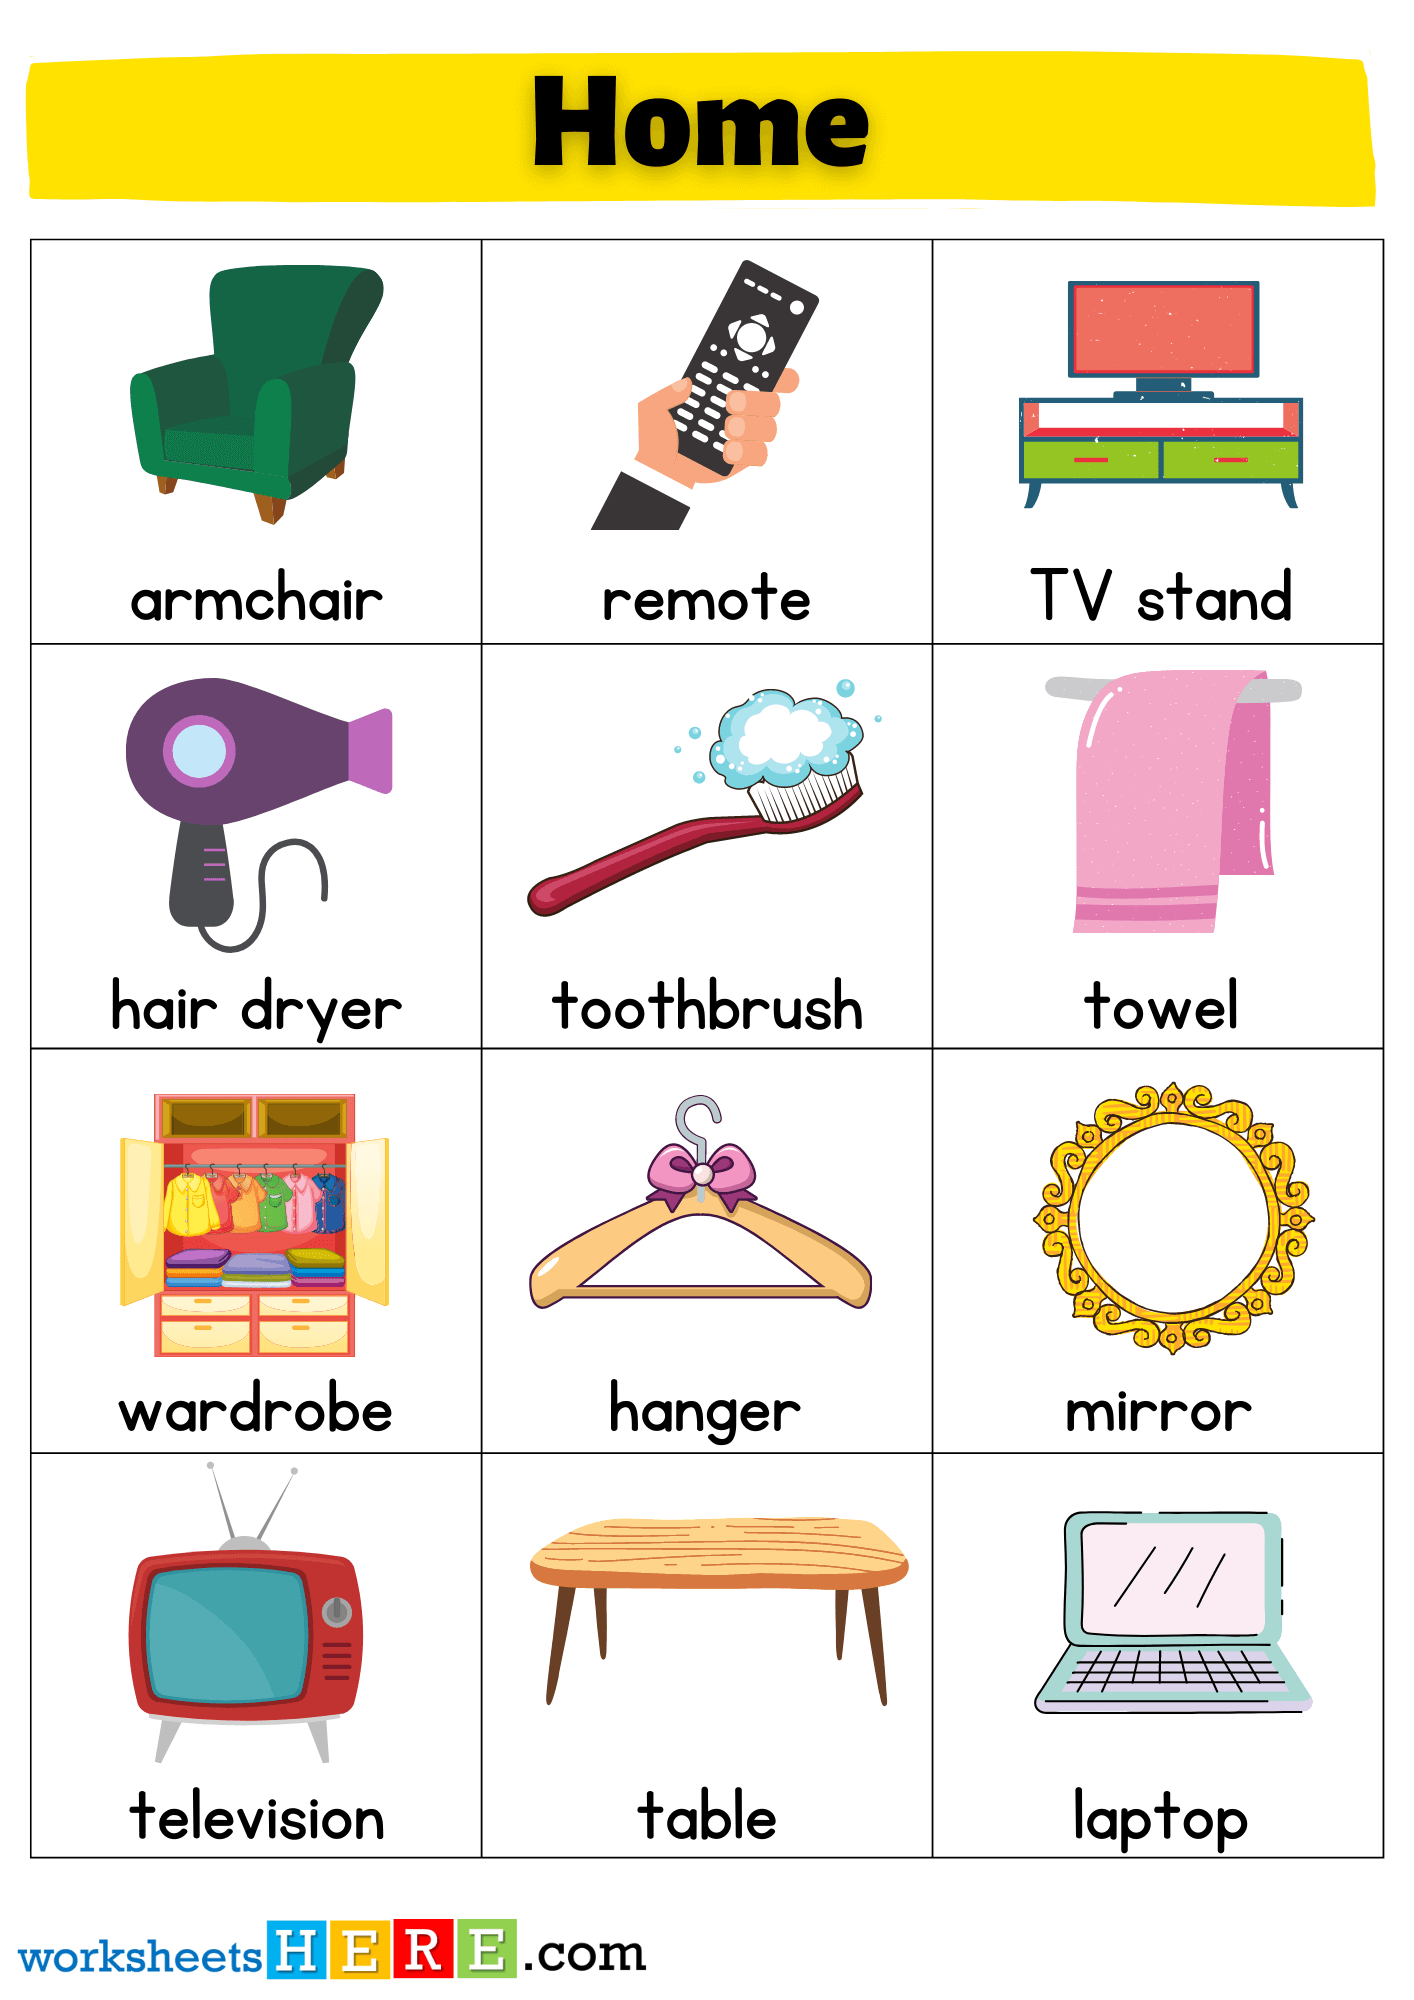 +20 Home Objects Names with Pictures Flashcards PDF Worksheets For Students